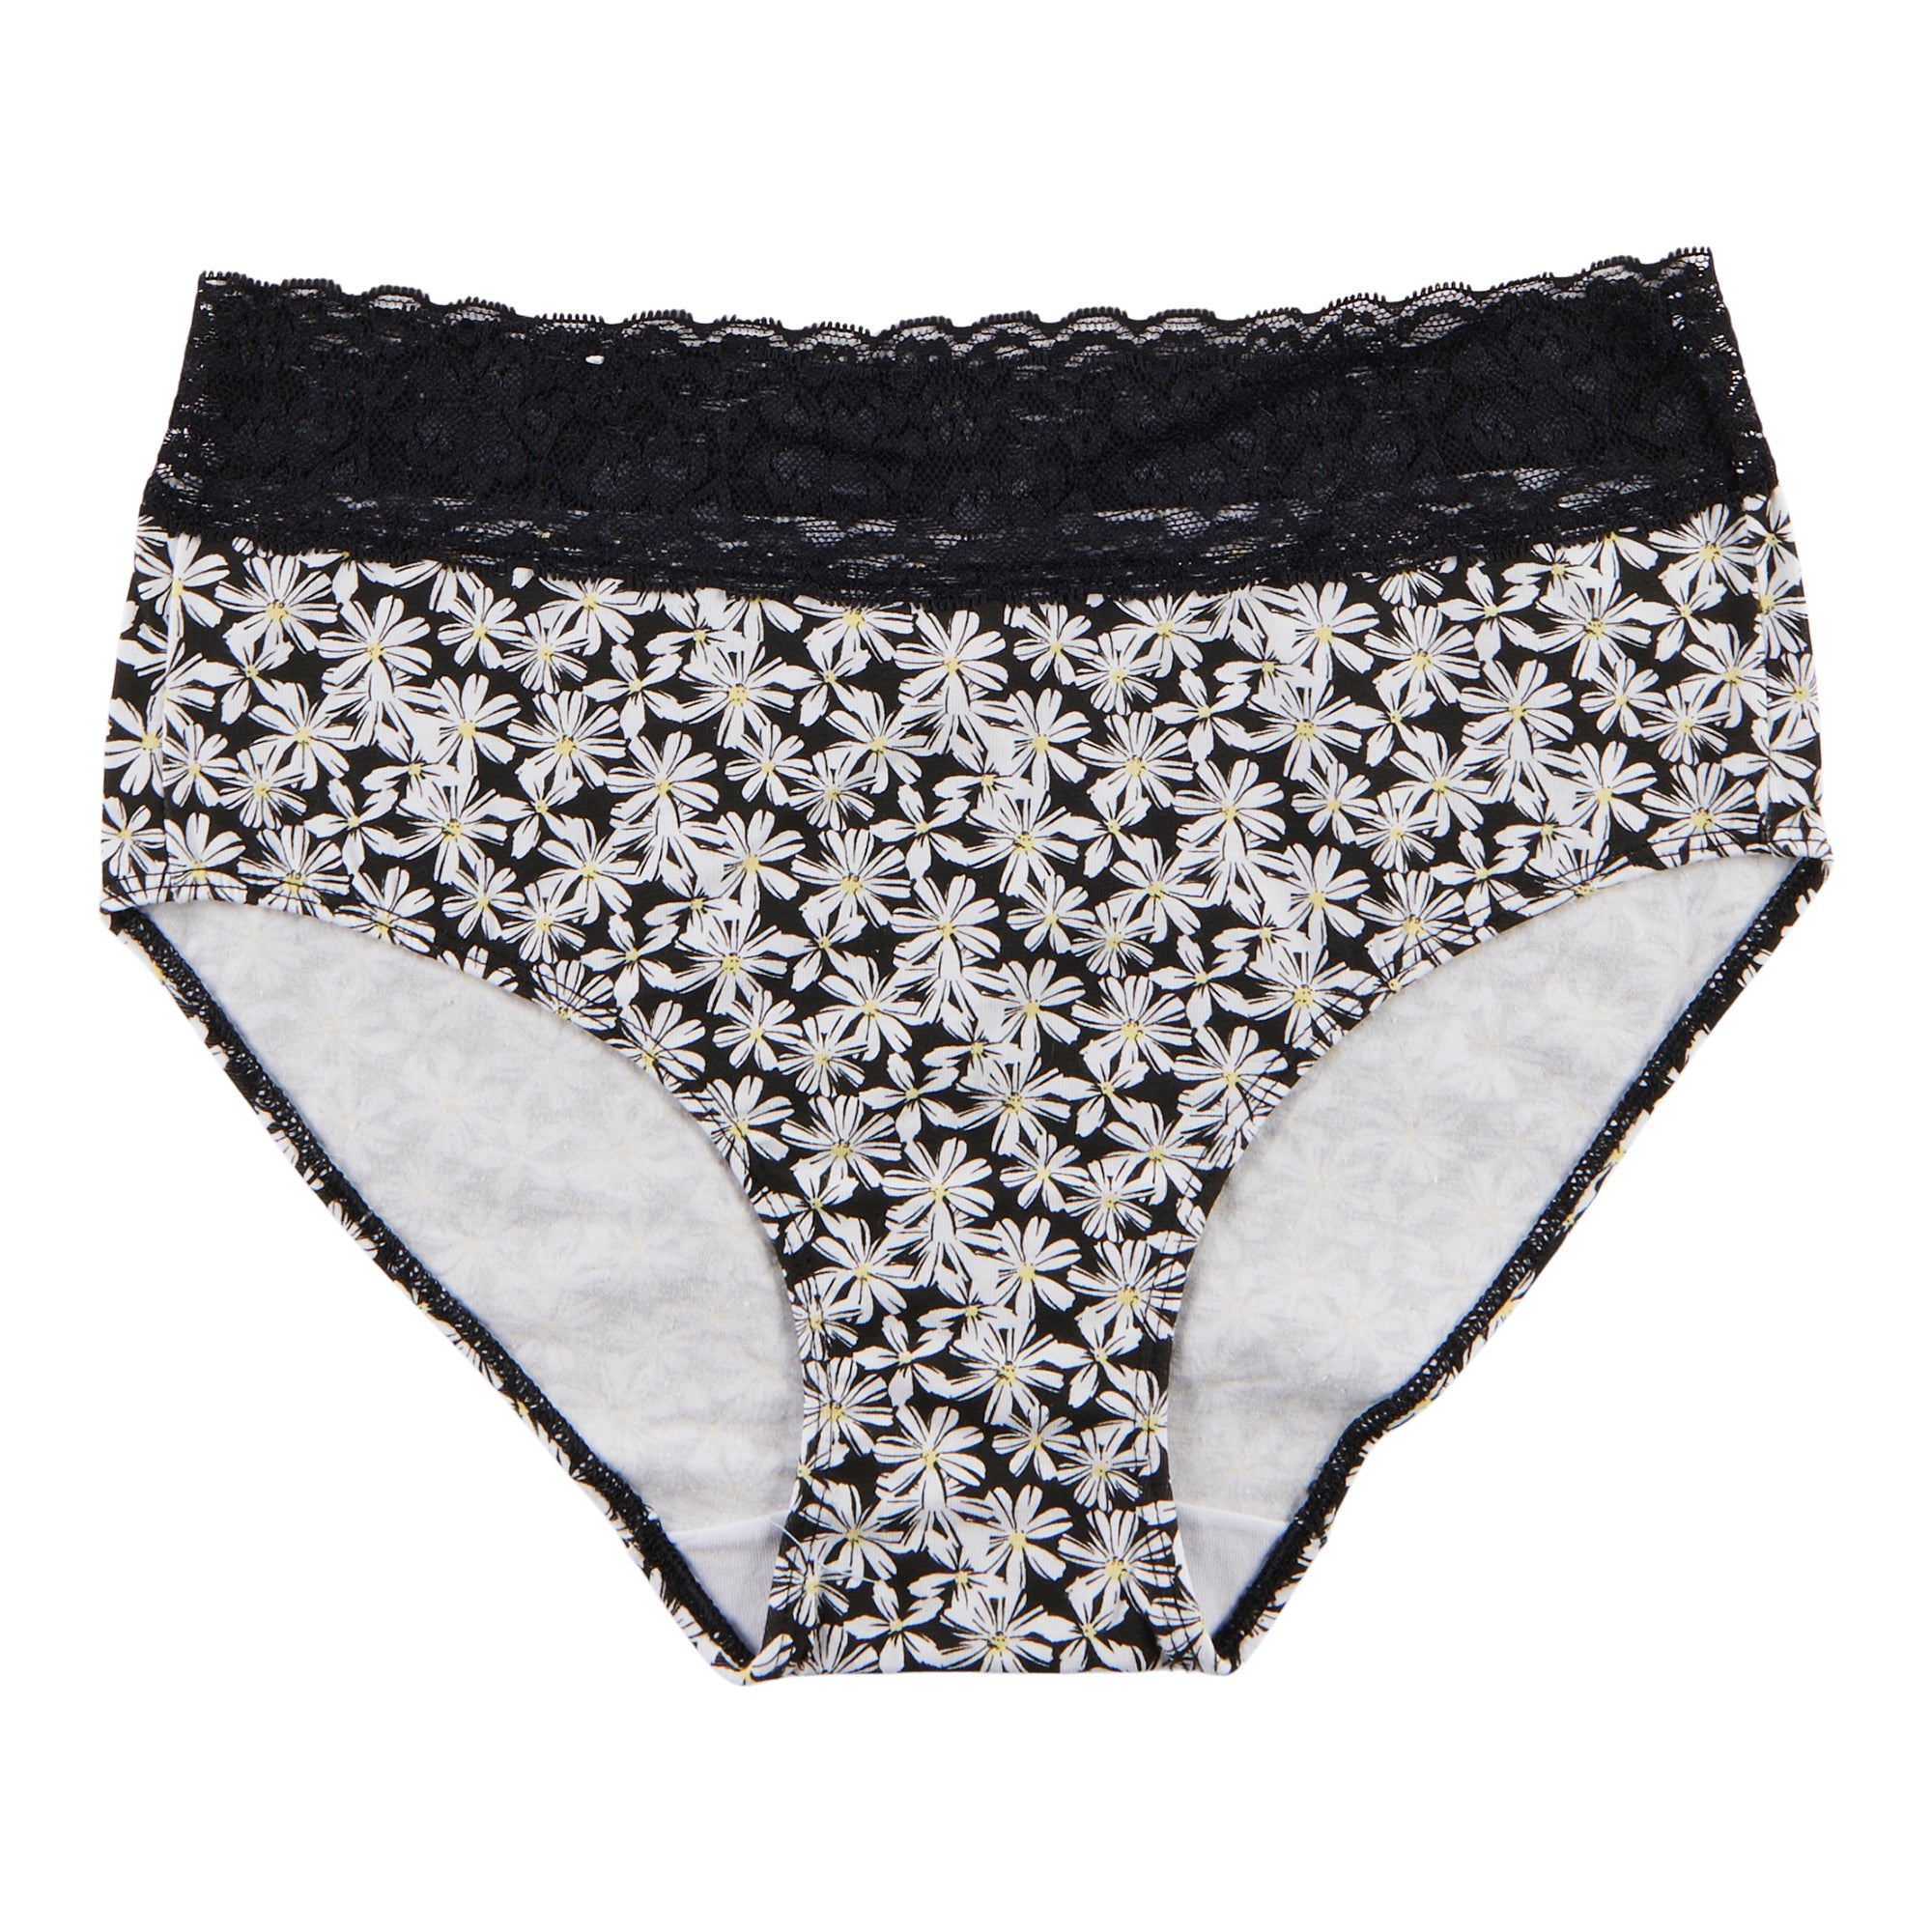 Carisma Women's Printed Lace Back Underwear, 2-Pack – Giant Tiger